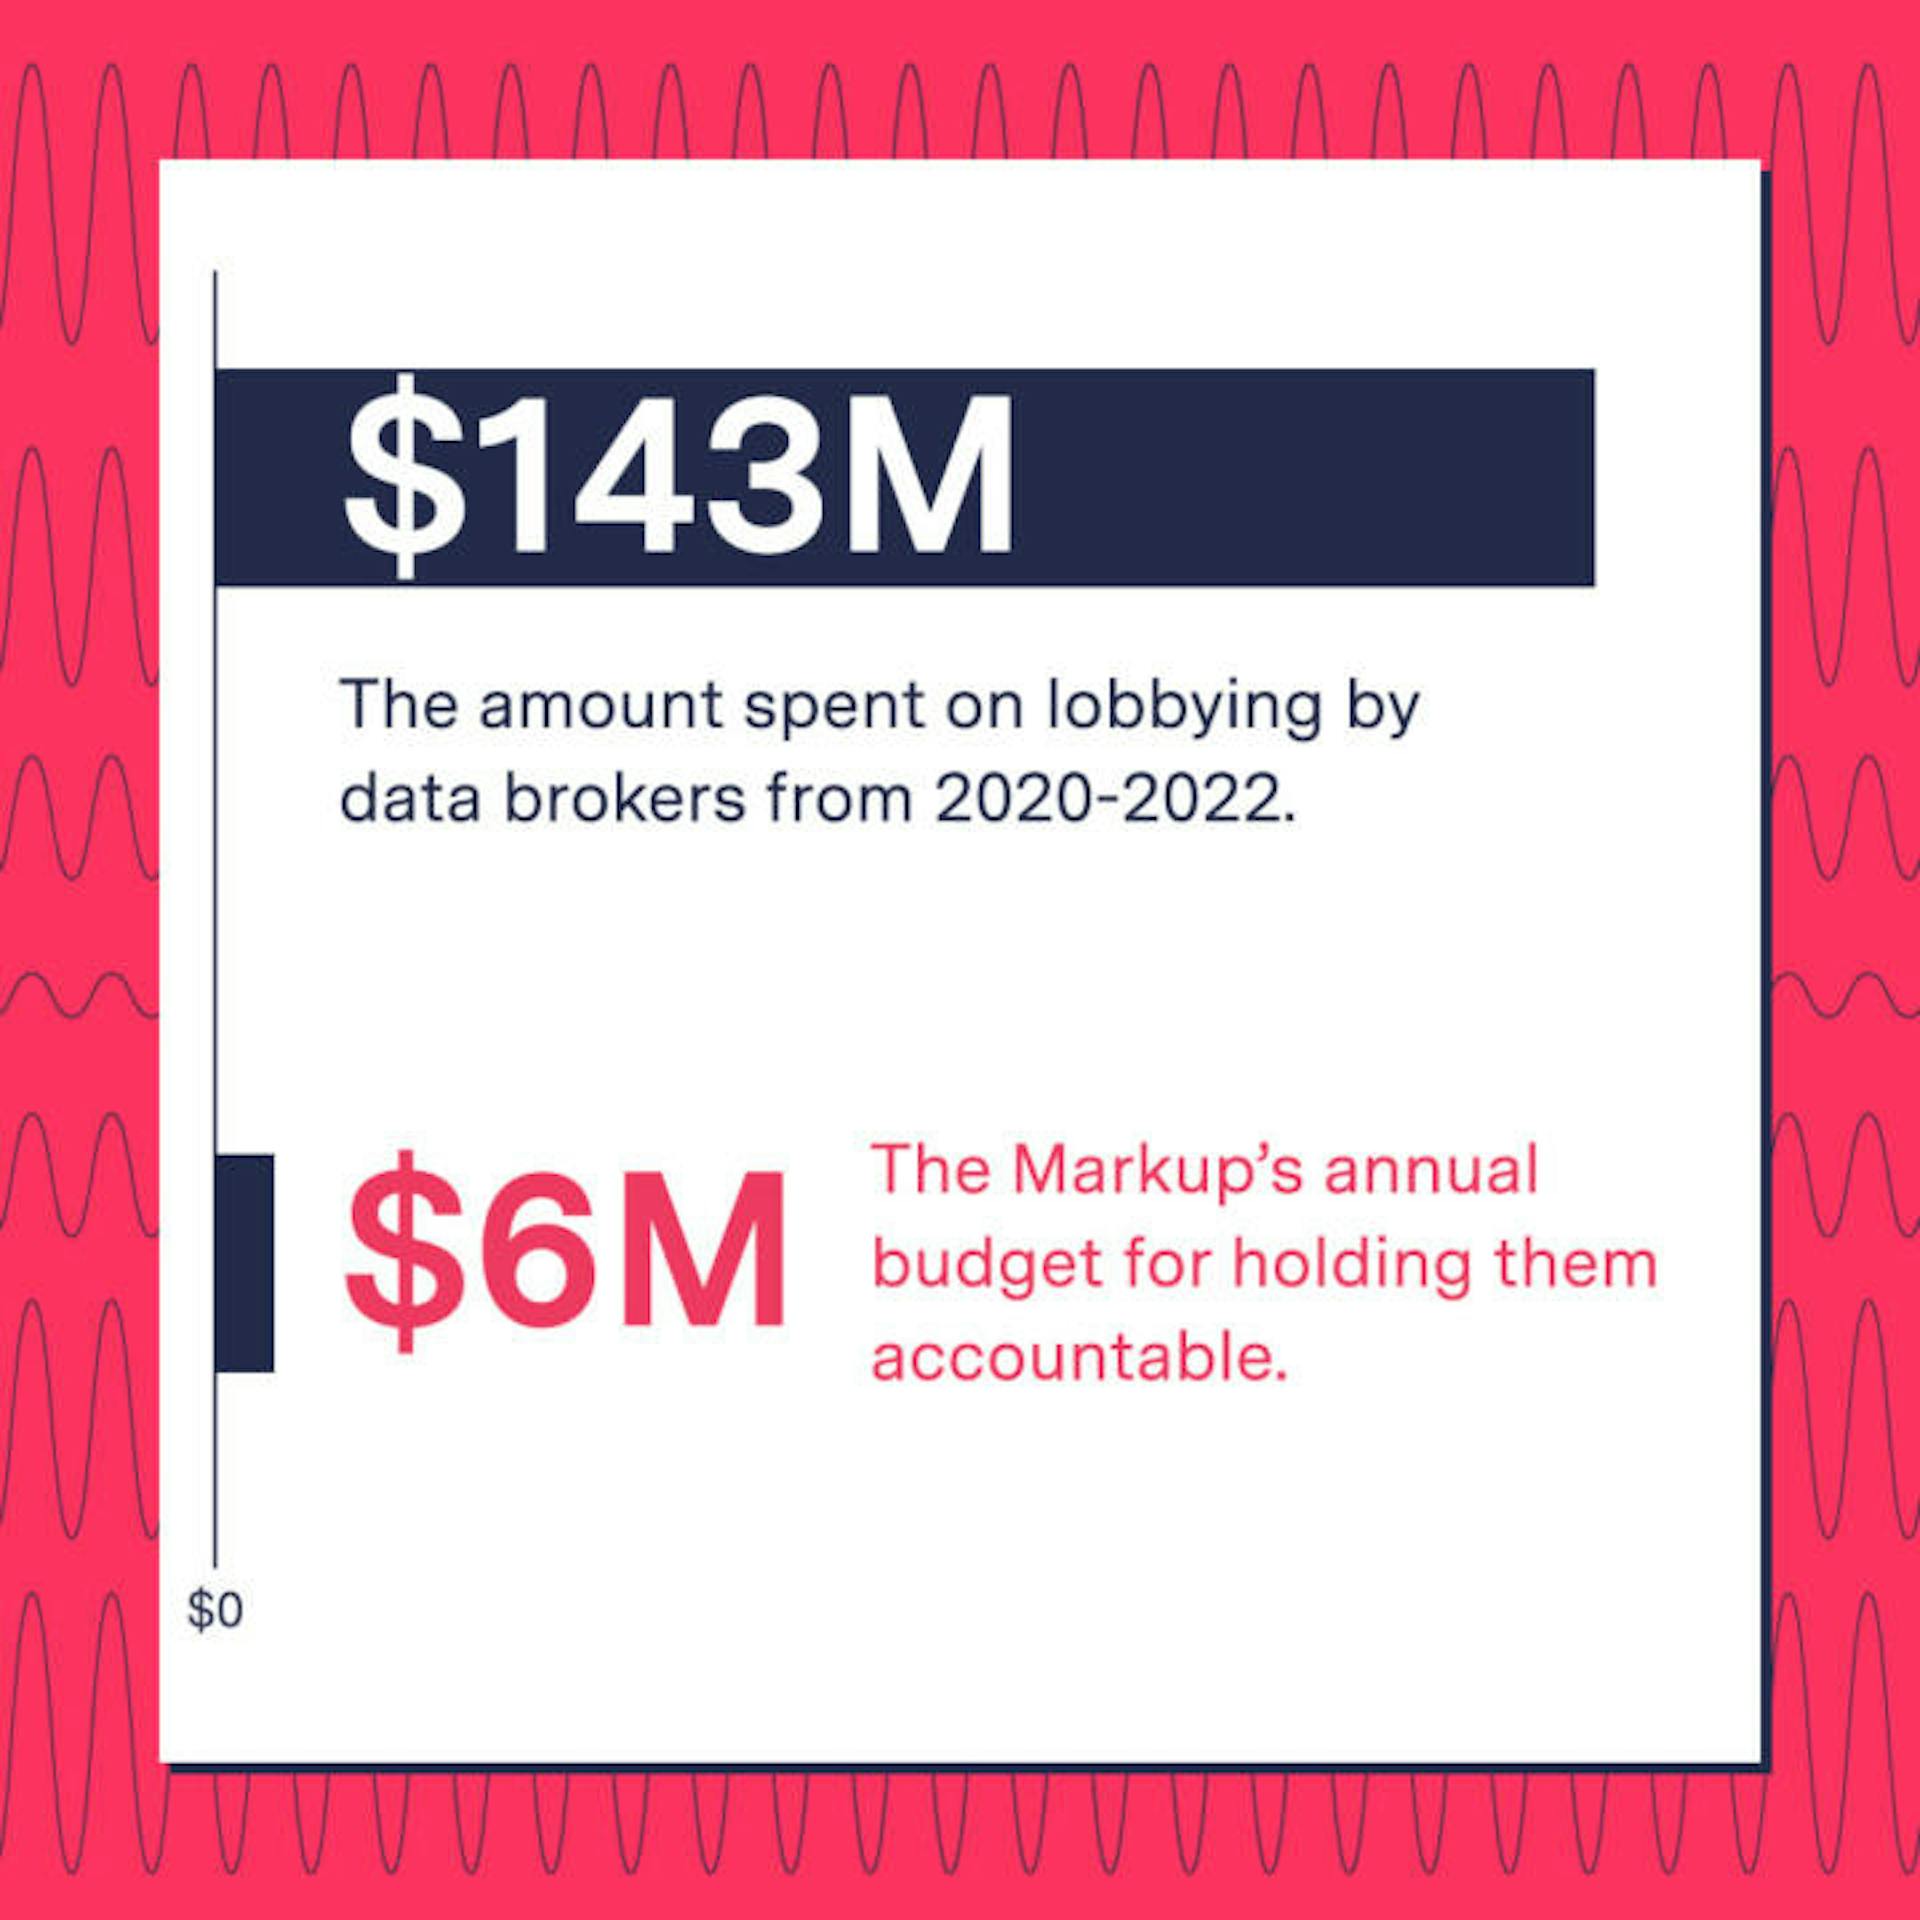 $143M: The amount spent on lobbying by data brokers from 2020-2022. $6M: The Markup's annual budget for holding them accountable.